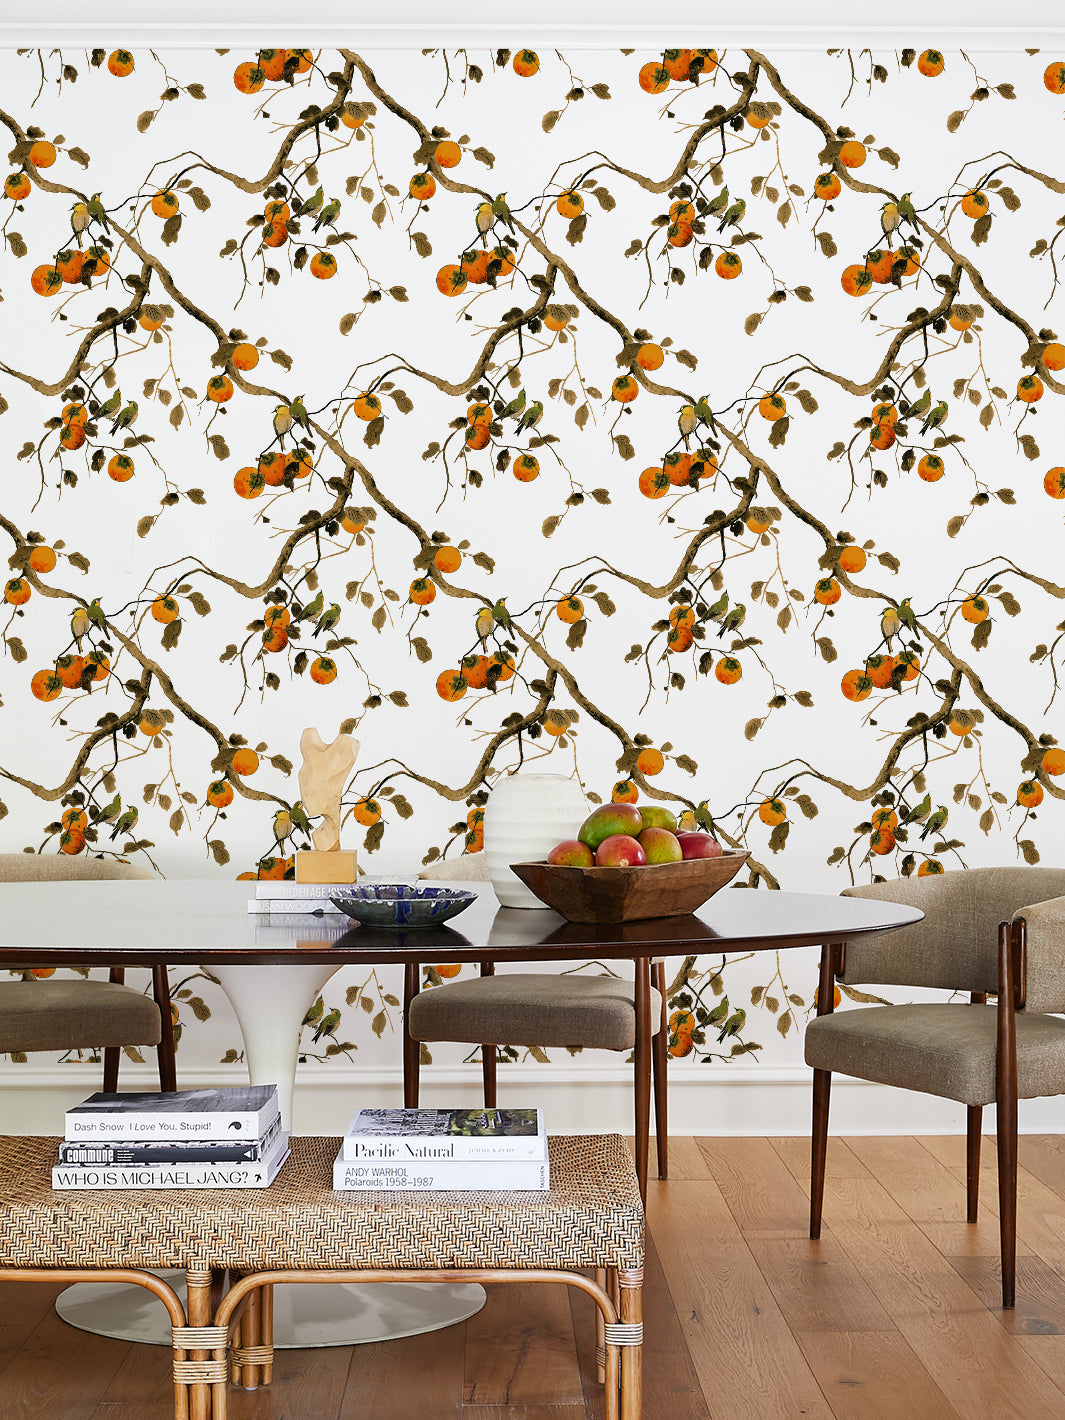 'Persimmon Birds' Wallpaper by Nathan Turner - Persimmon